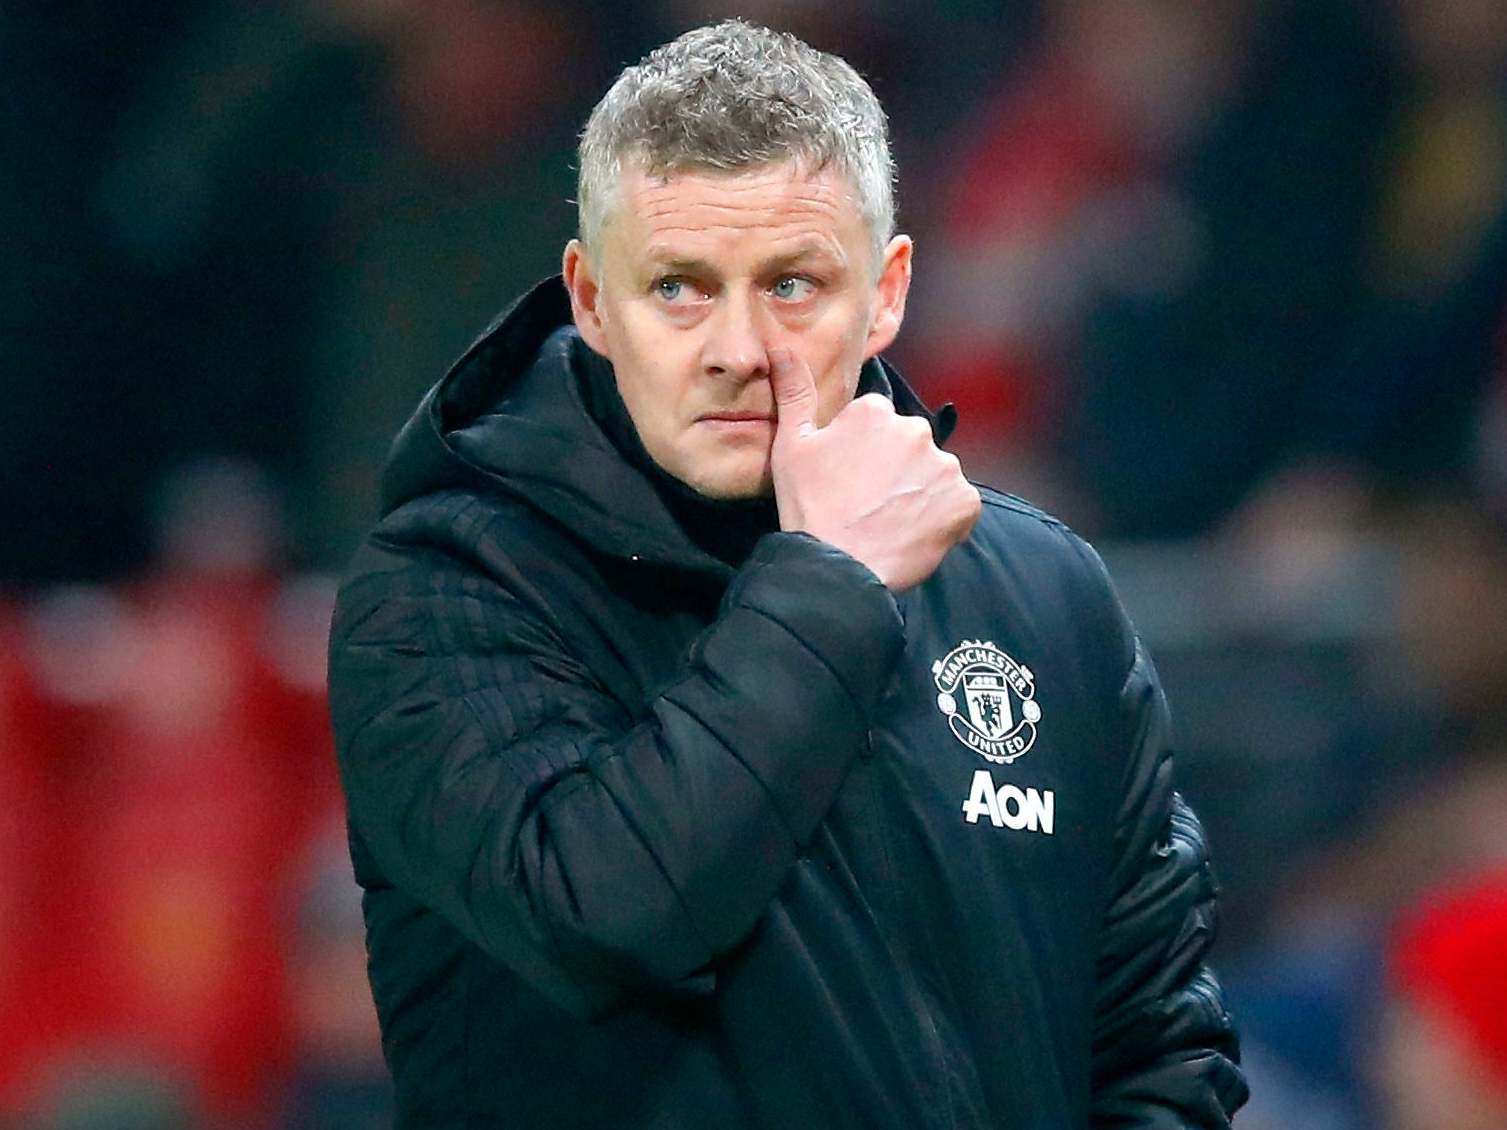 Solskjaer offered a cryptic anaolgy on Sanchez's future